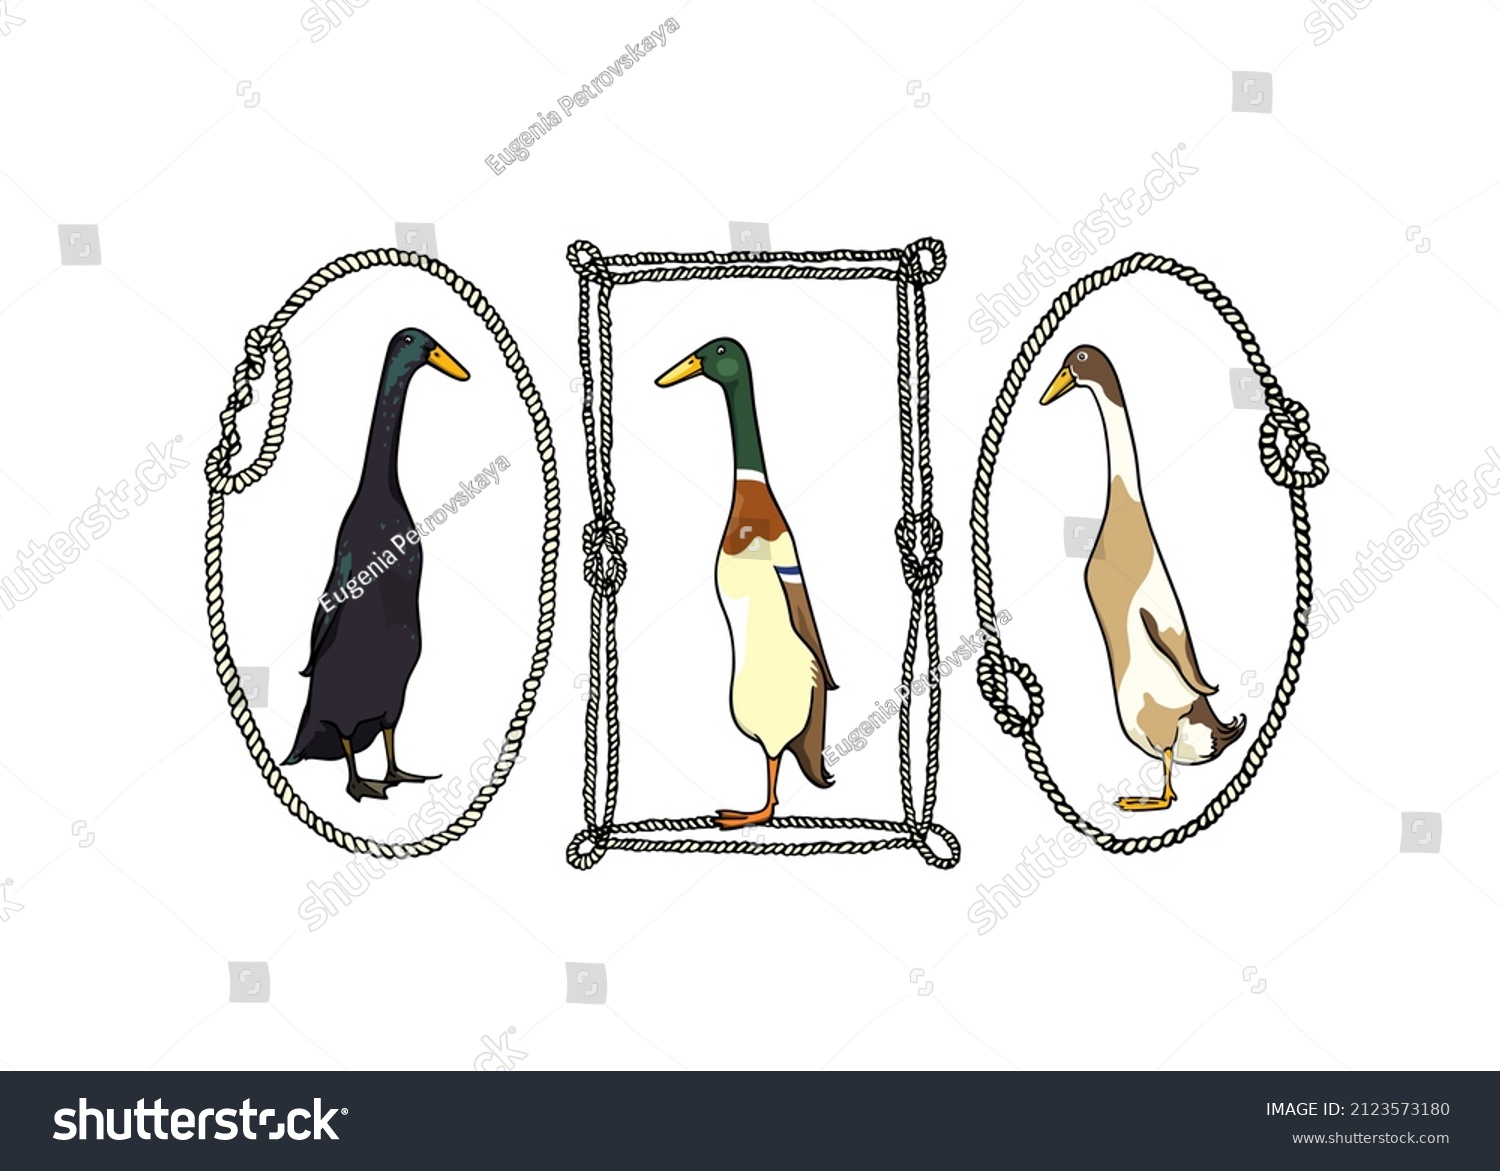 SVG of Vector card with hand drawn set of portraits of Indian Runner ducks in nautical rope frames. Ink drawing, graphic style. Beautiful farm products design elements. svg